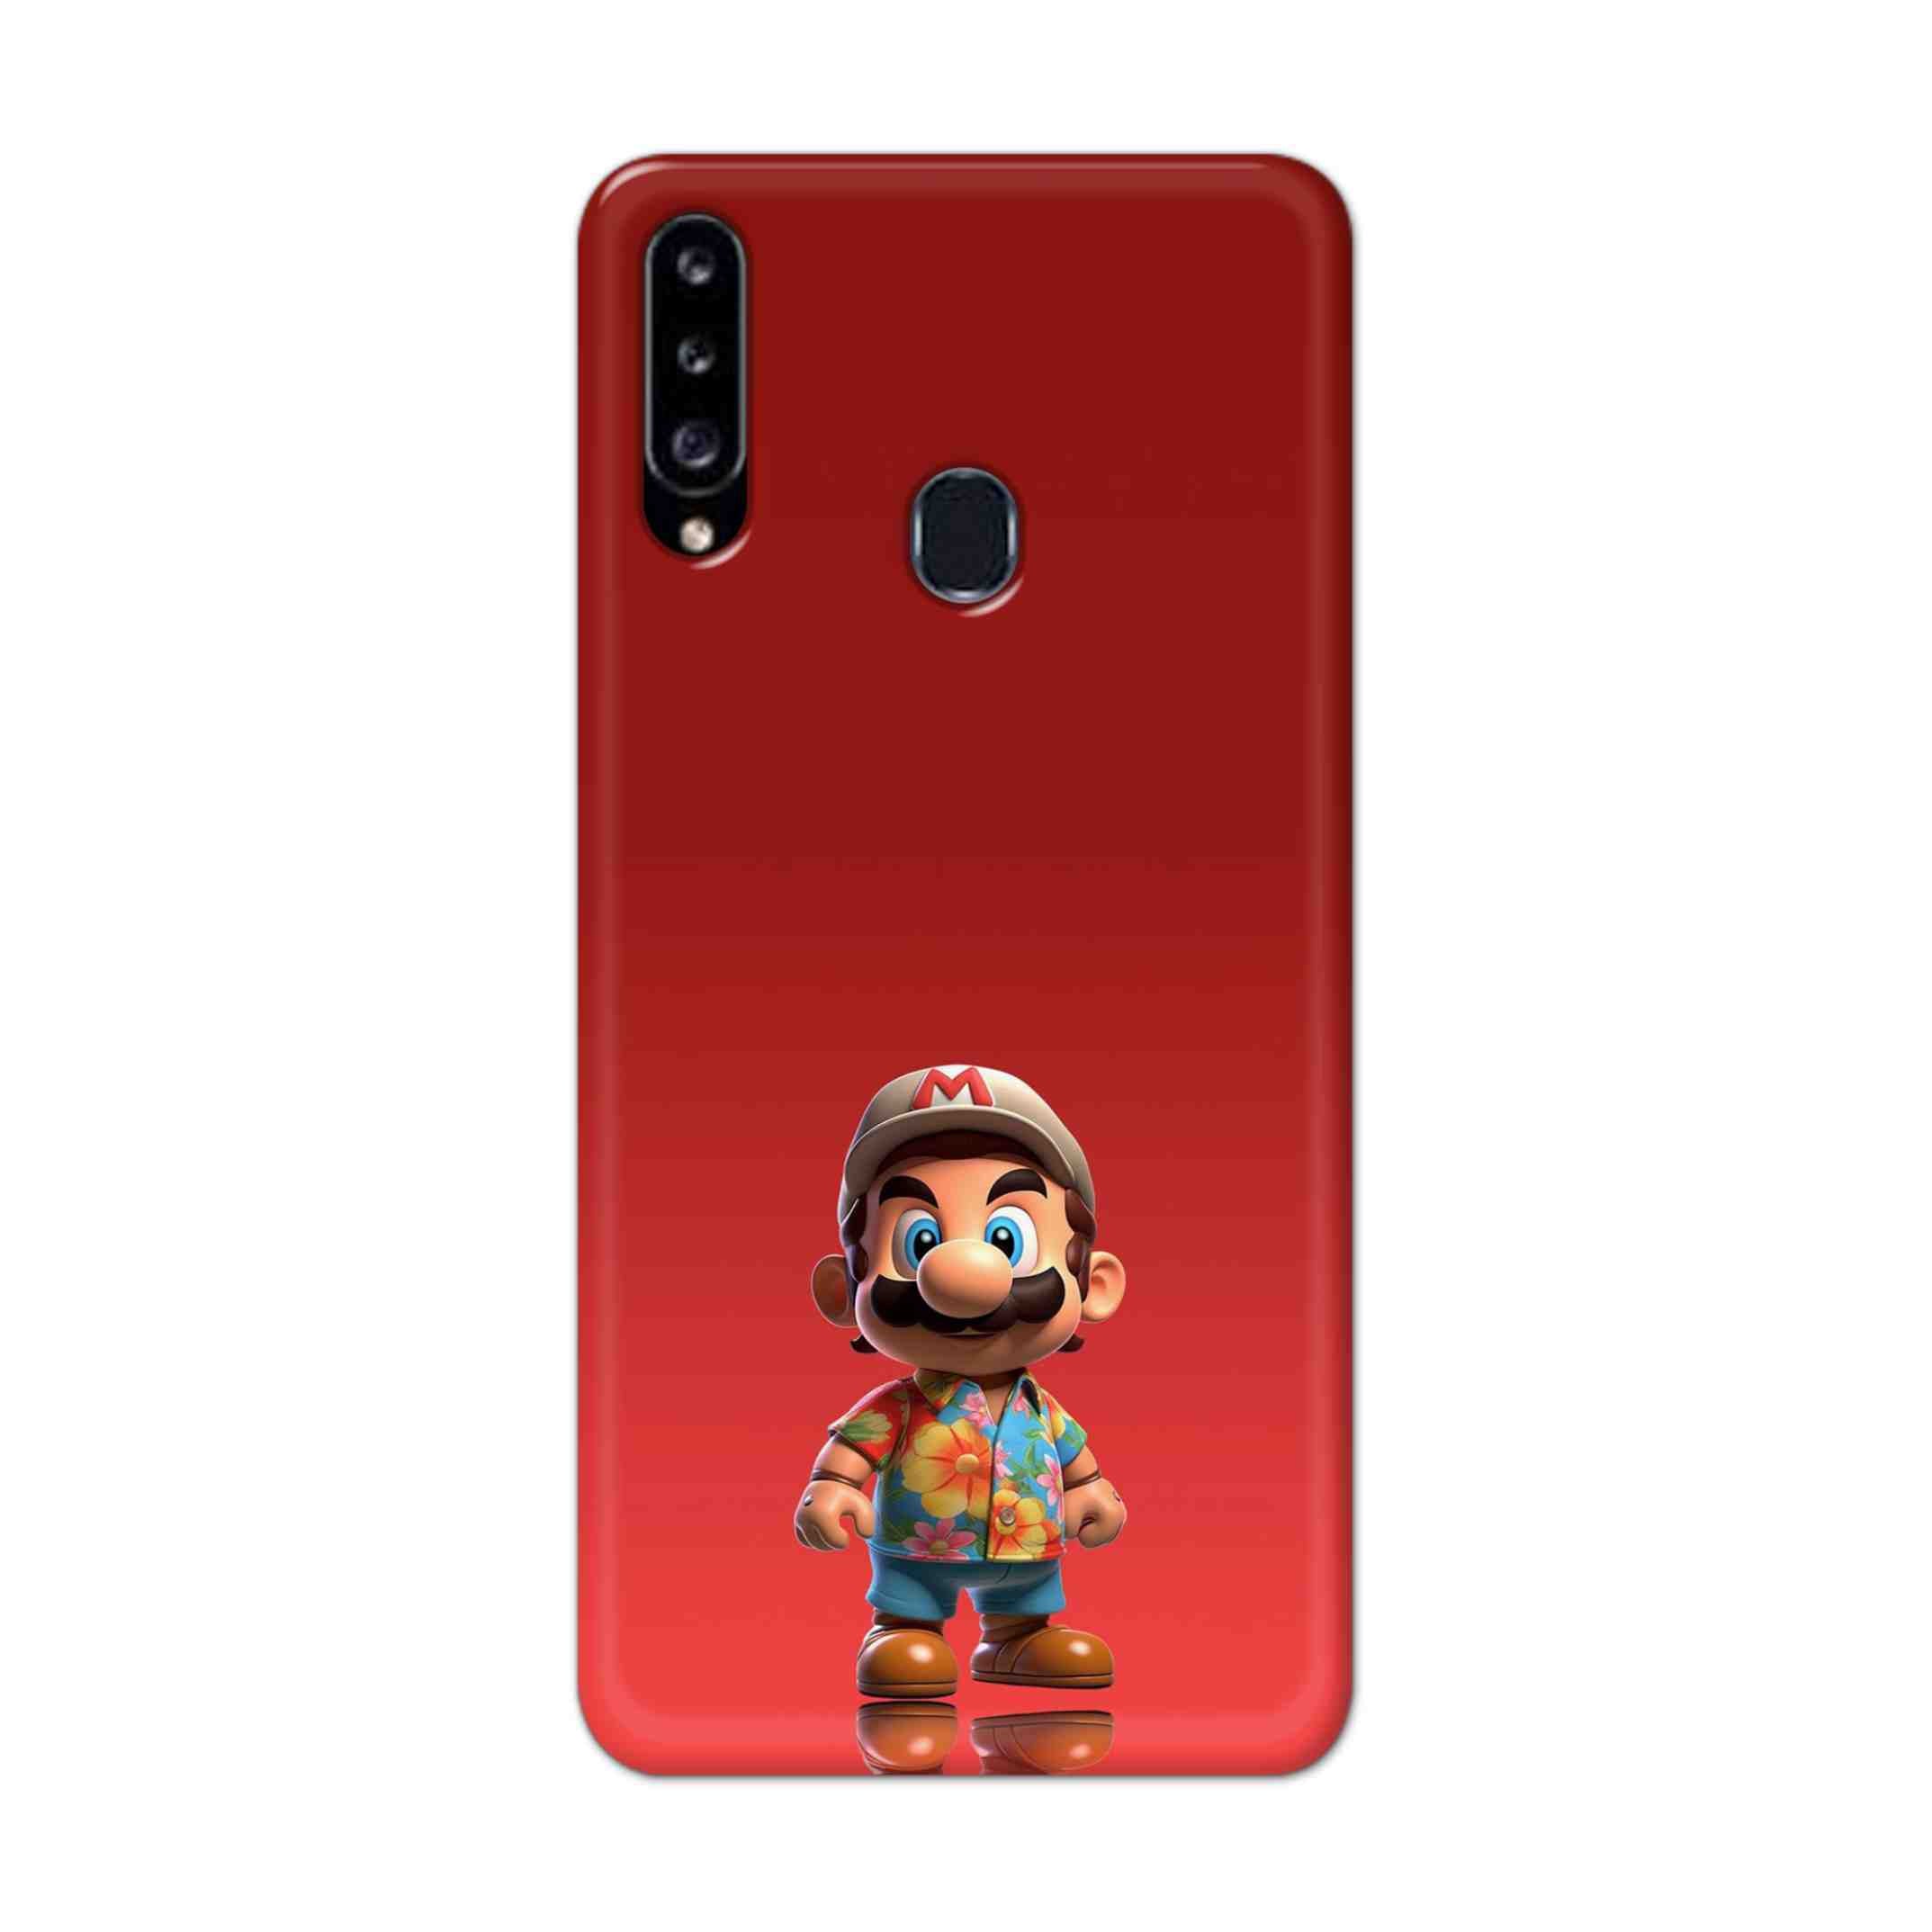 Buy Mario Hard Back Mobile Phone Case Cover For Samsung Galaxy A21 Online